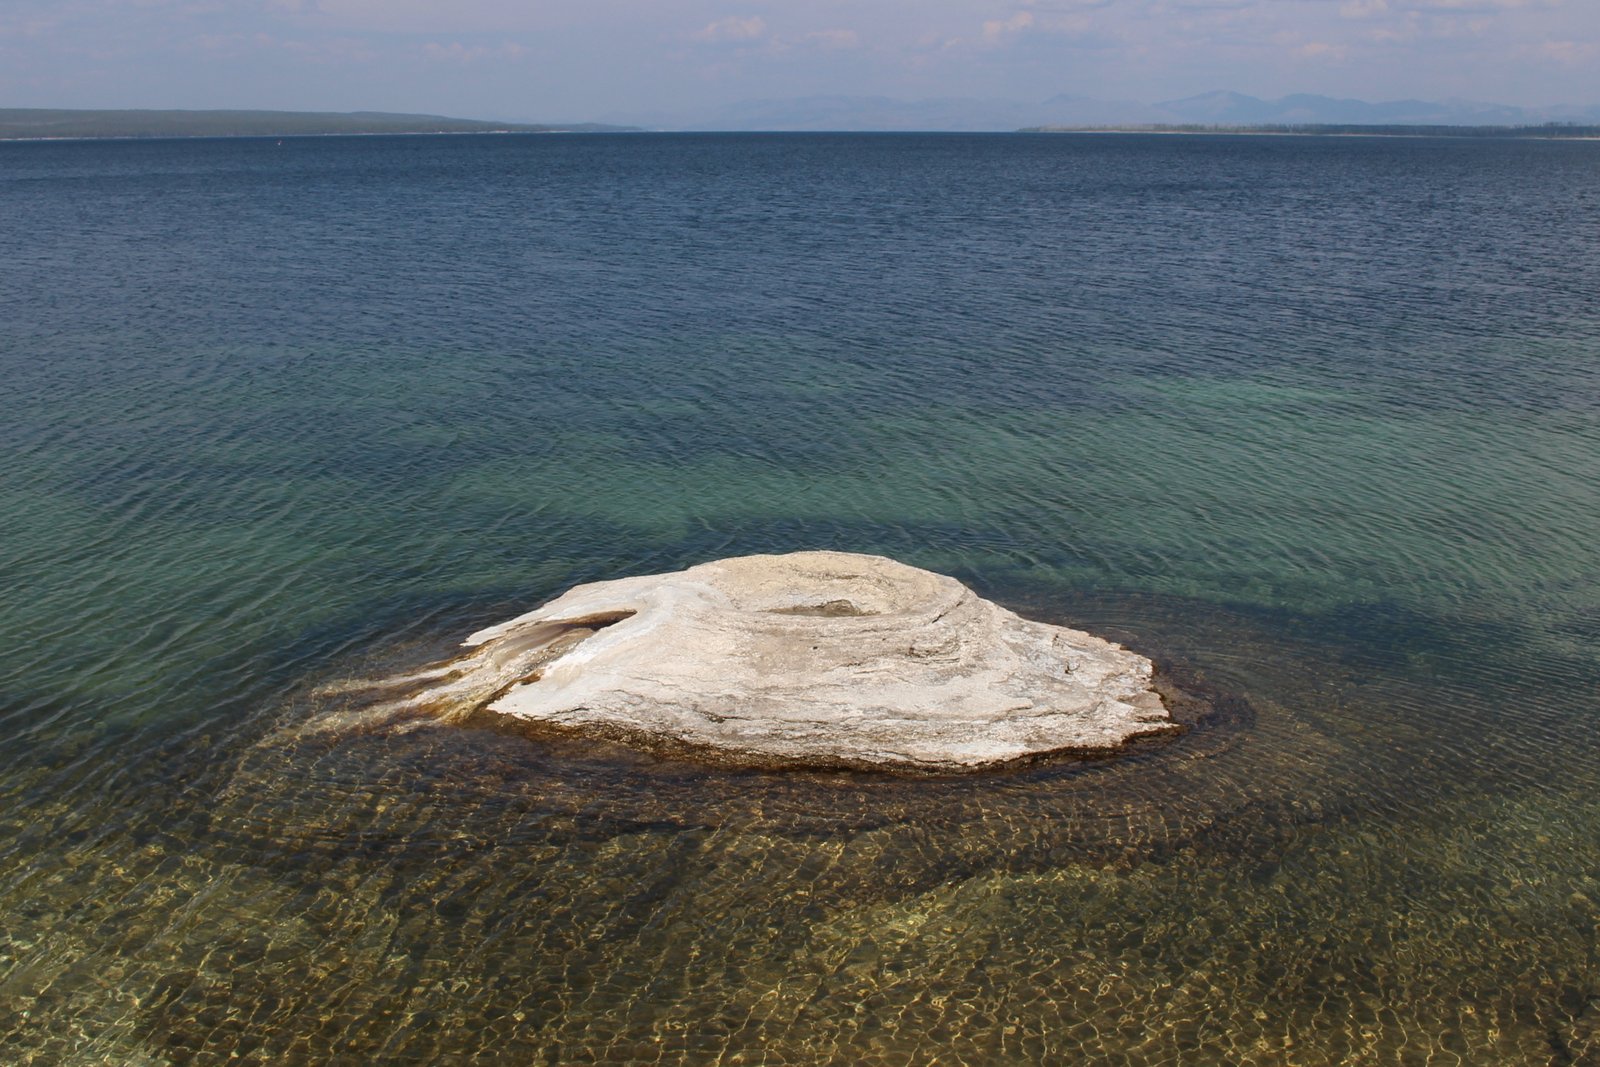 Fishing Cone, Yellowstone National Park (taken on August 9, 2015)